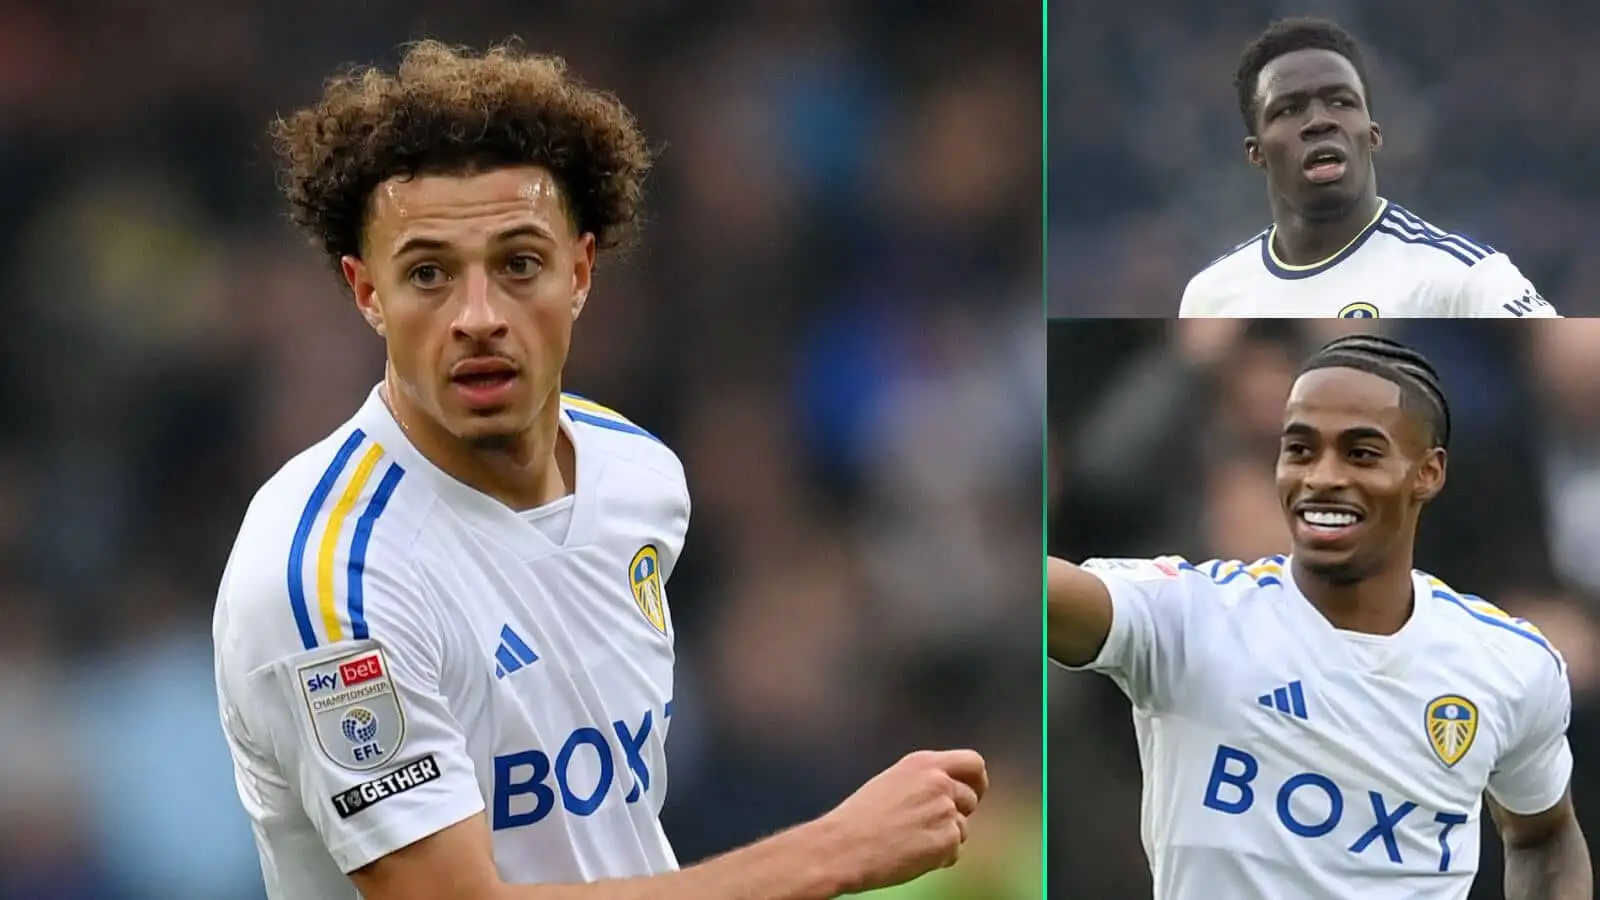 Leeds United players Ethan Ampadu, Wilfried Gnonto and Crysencio Summerville